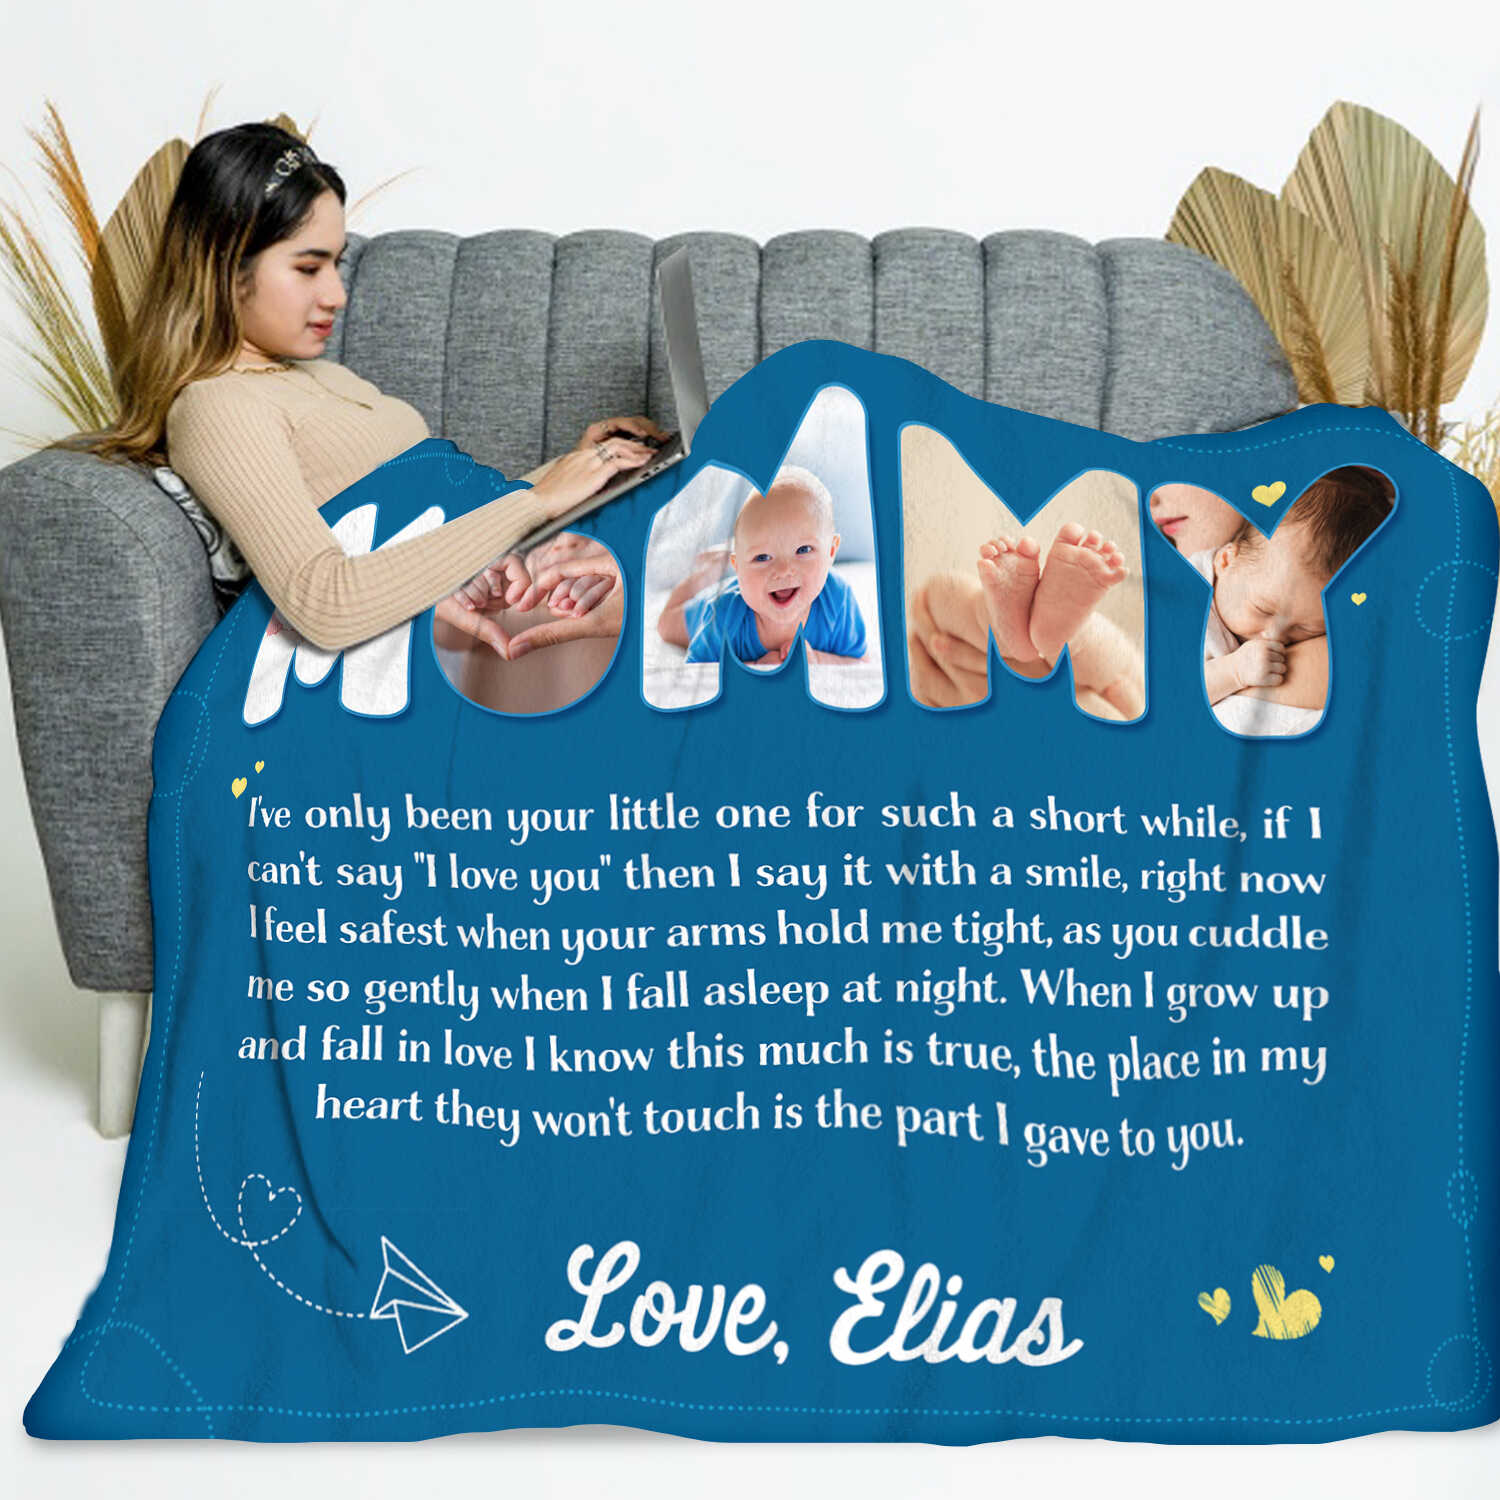 Gift for Mom From Son, First Mother's Day Gift, Personalized New